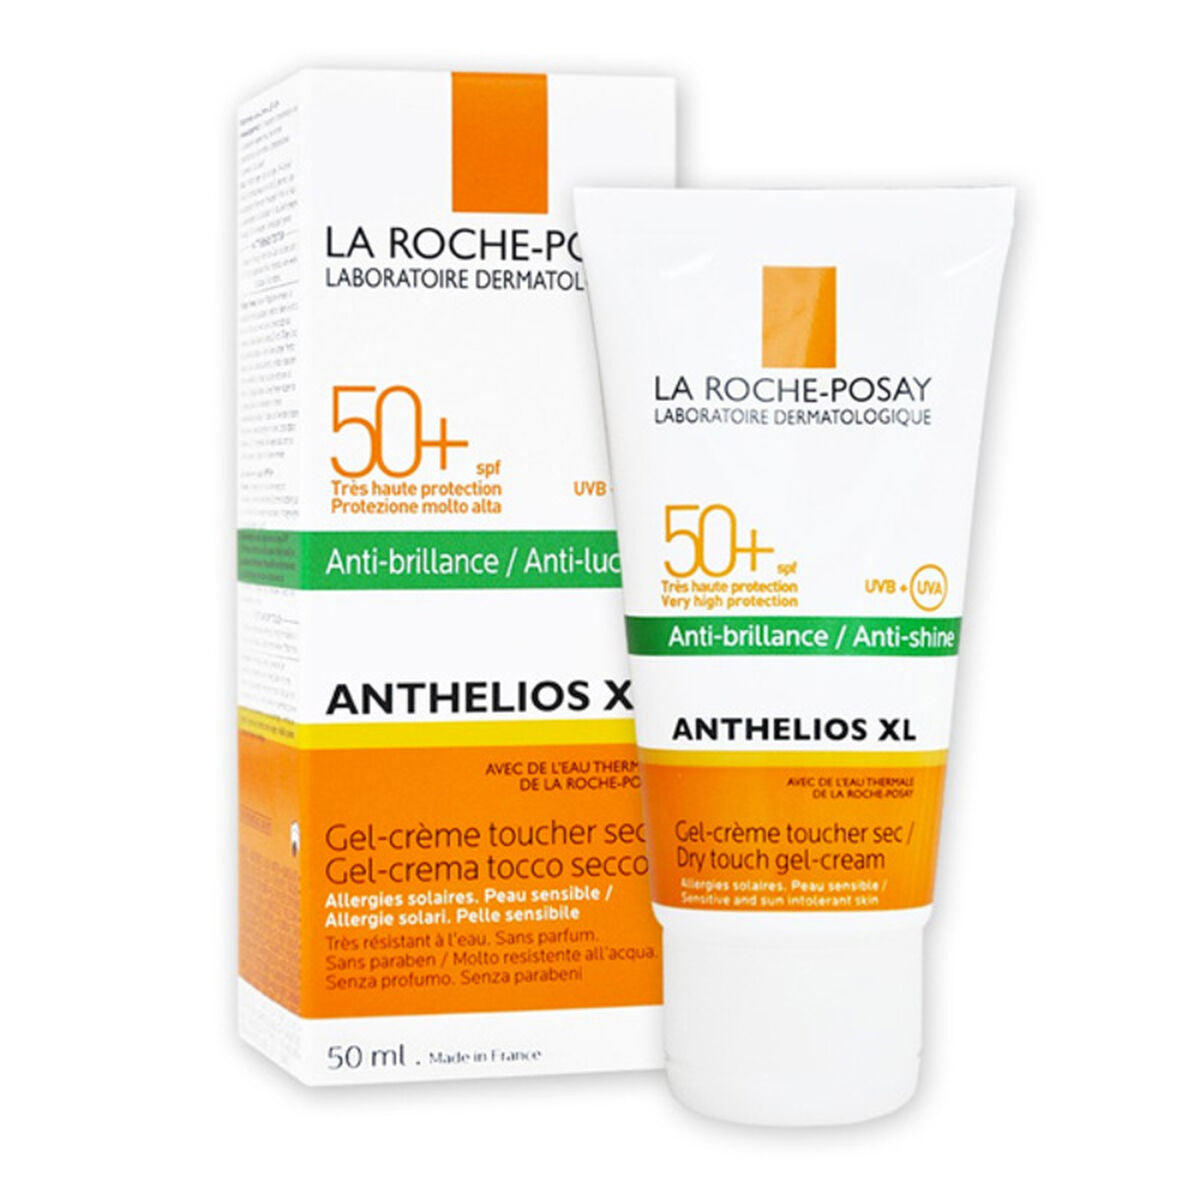 Sun Protection Gel Anthelios Dry Touch La Roche Posay Anthelios Xl Spf 50 (50 ml) SPF 50+ 50 ml-0